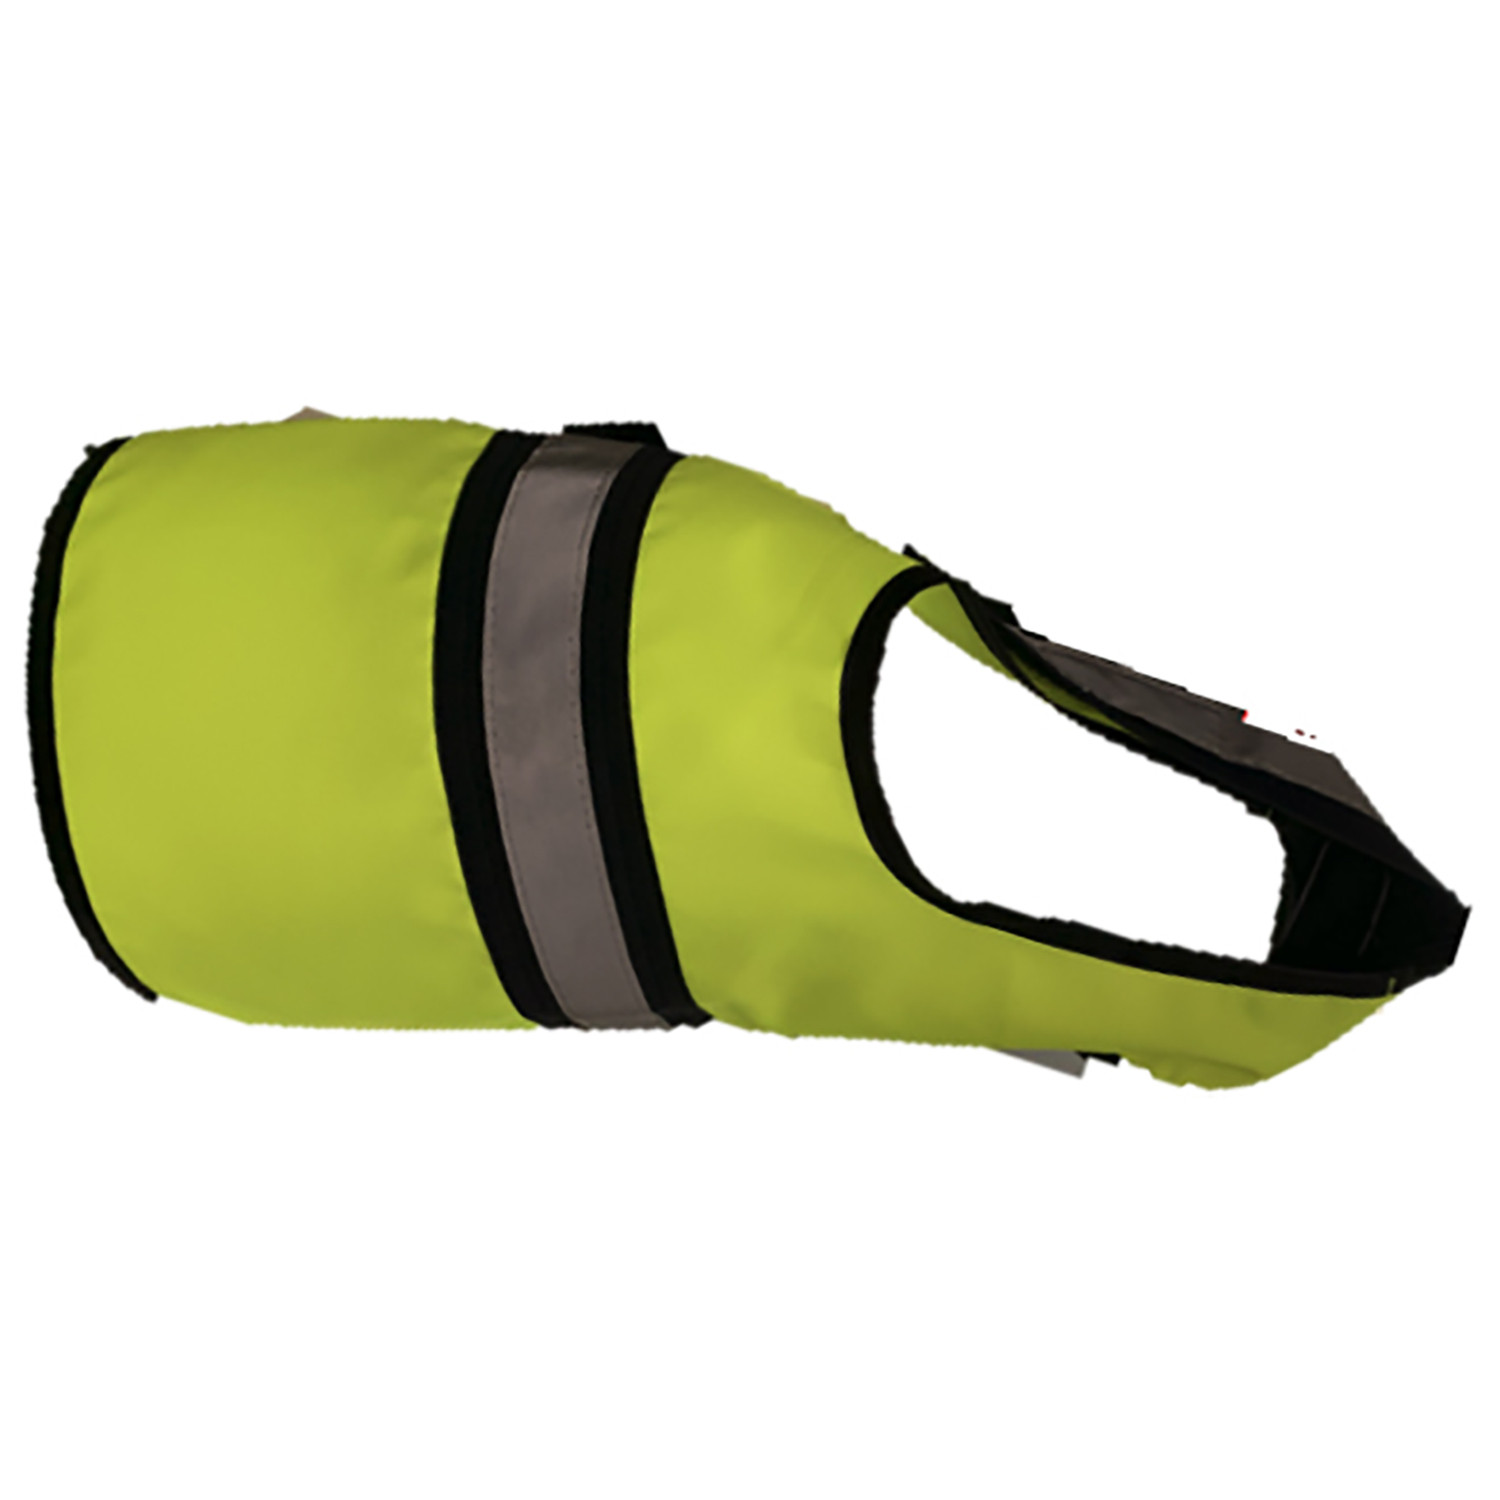 Lightweight High Visibility Gilet - XS Image 1